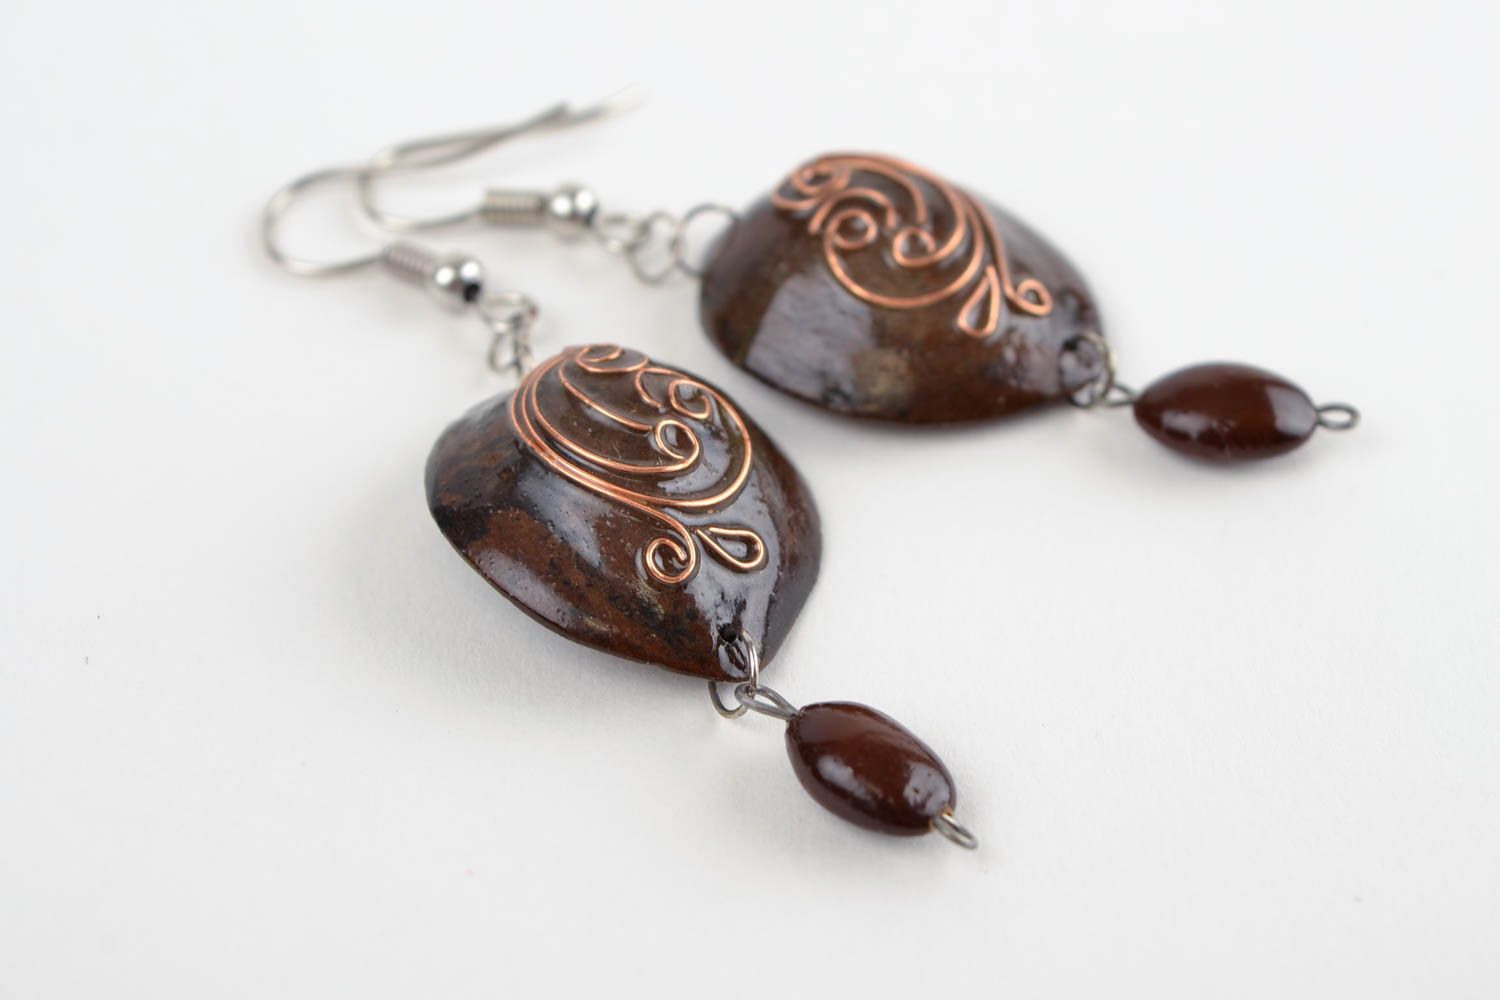 Unusual earrings with charms handmade jewelry in eco style designer earrings photo 3